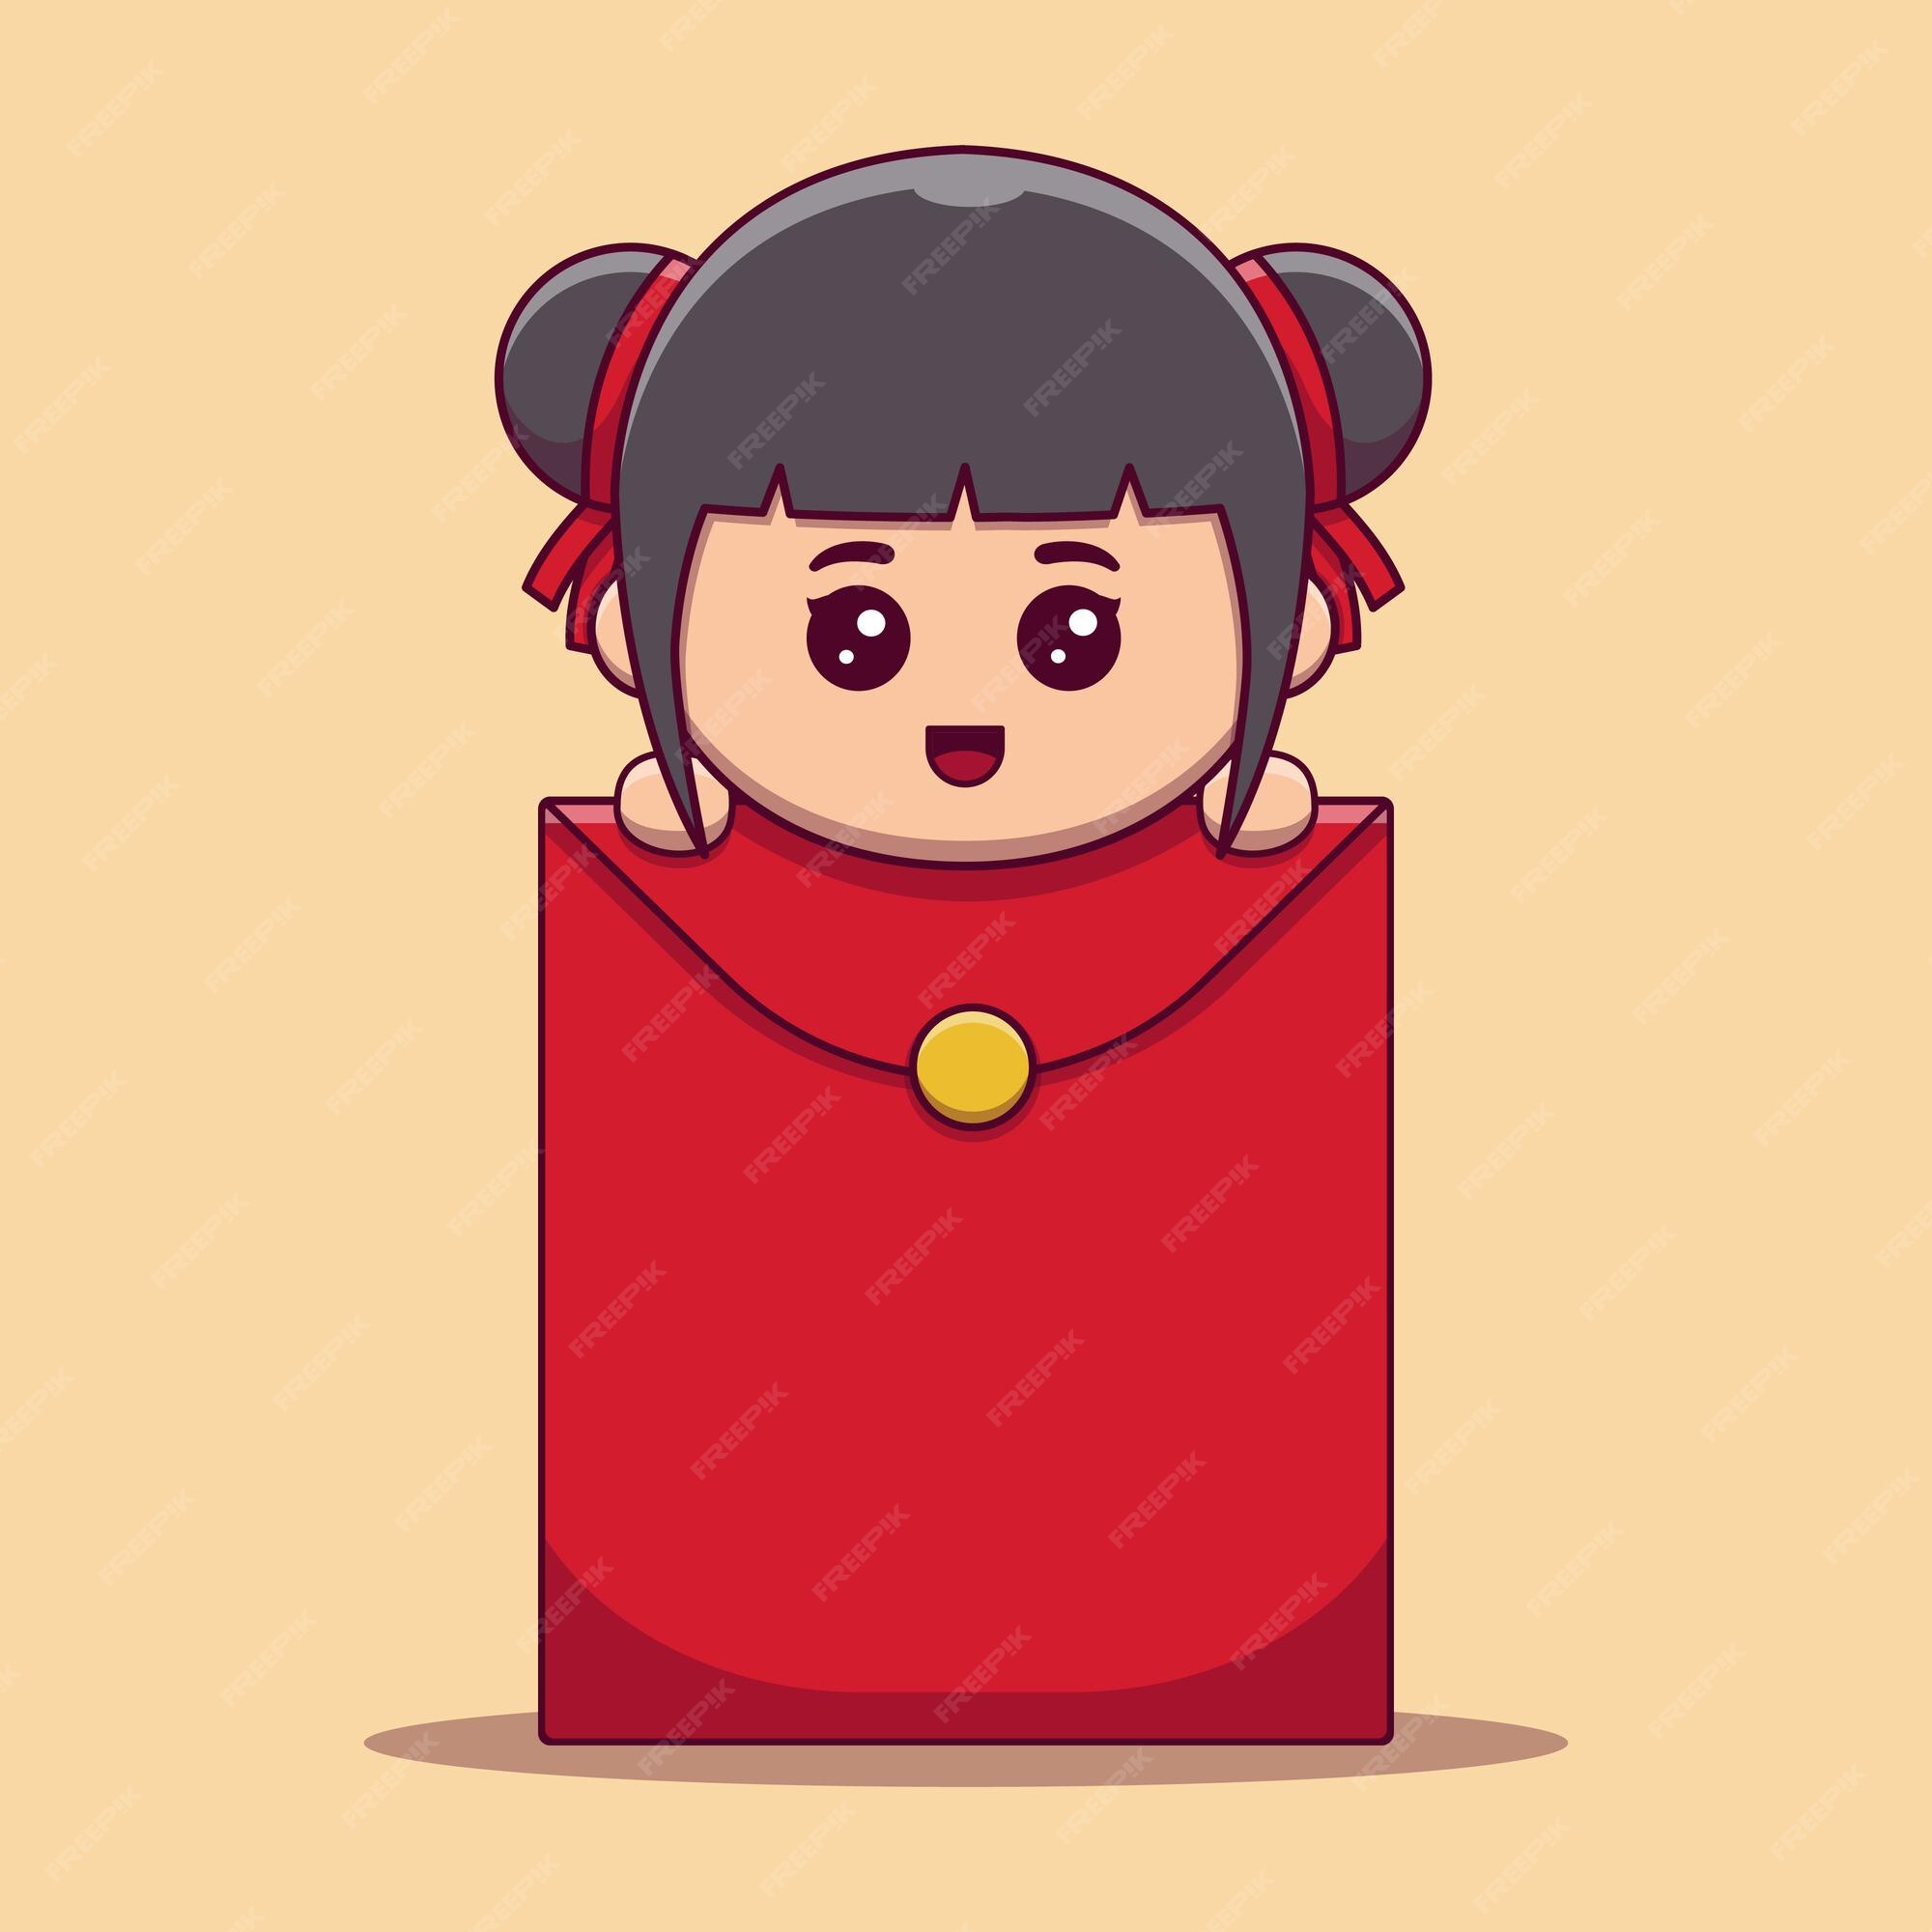 Chinese Girl Counting Red Envelope Clip Art - Educational Clip Arts and  Bible Stories